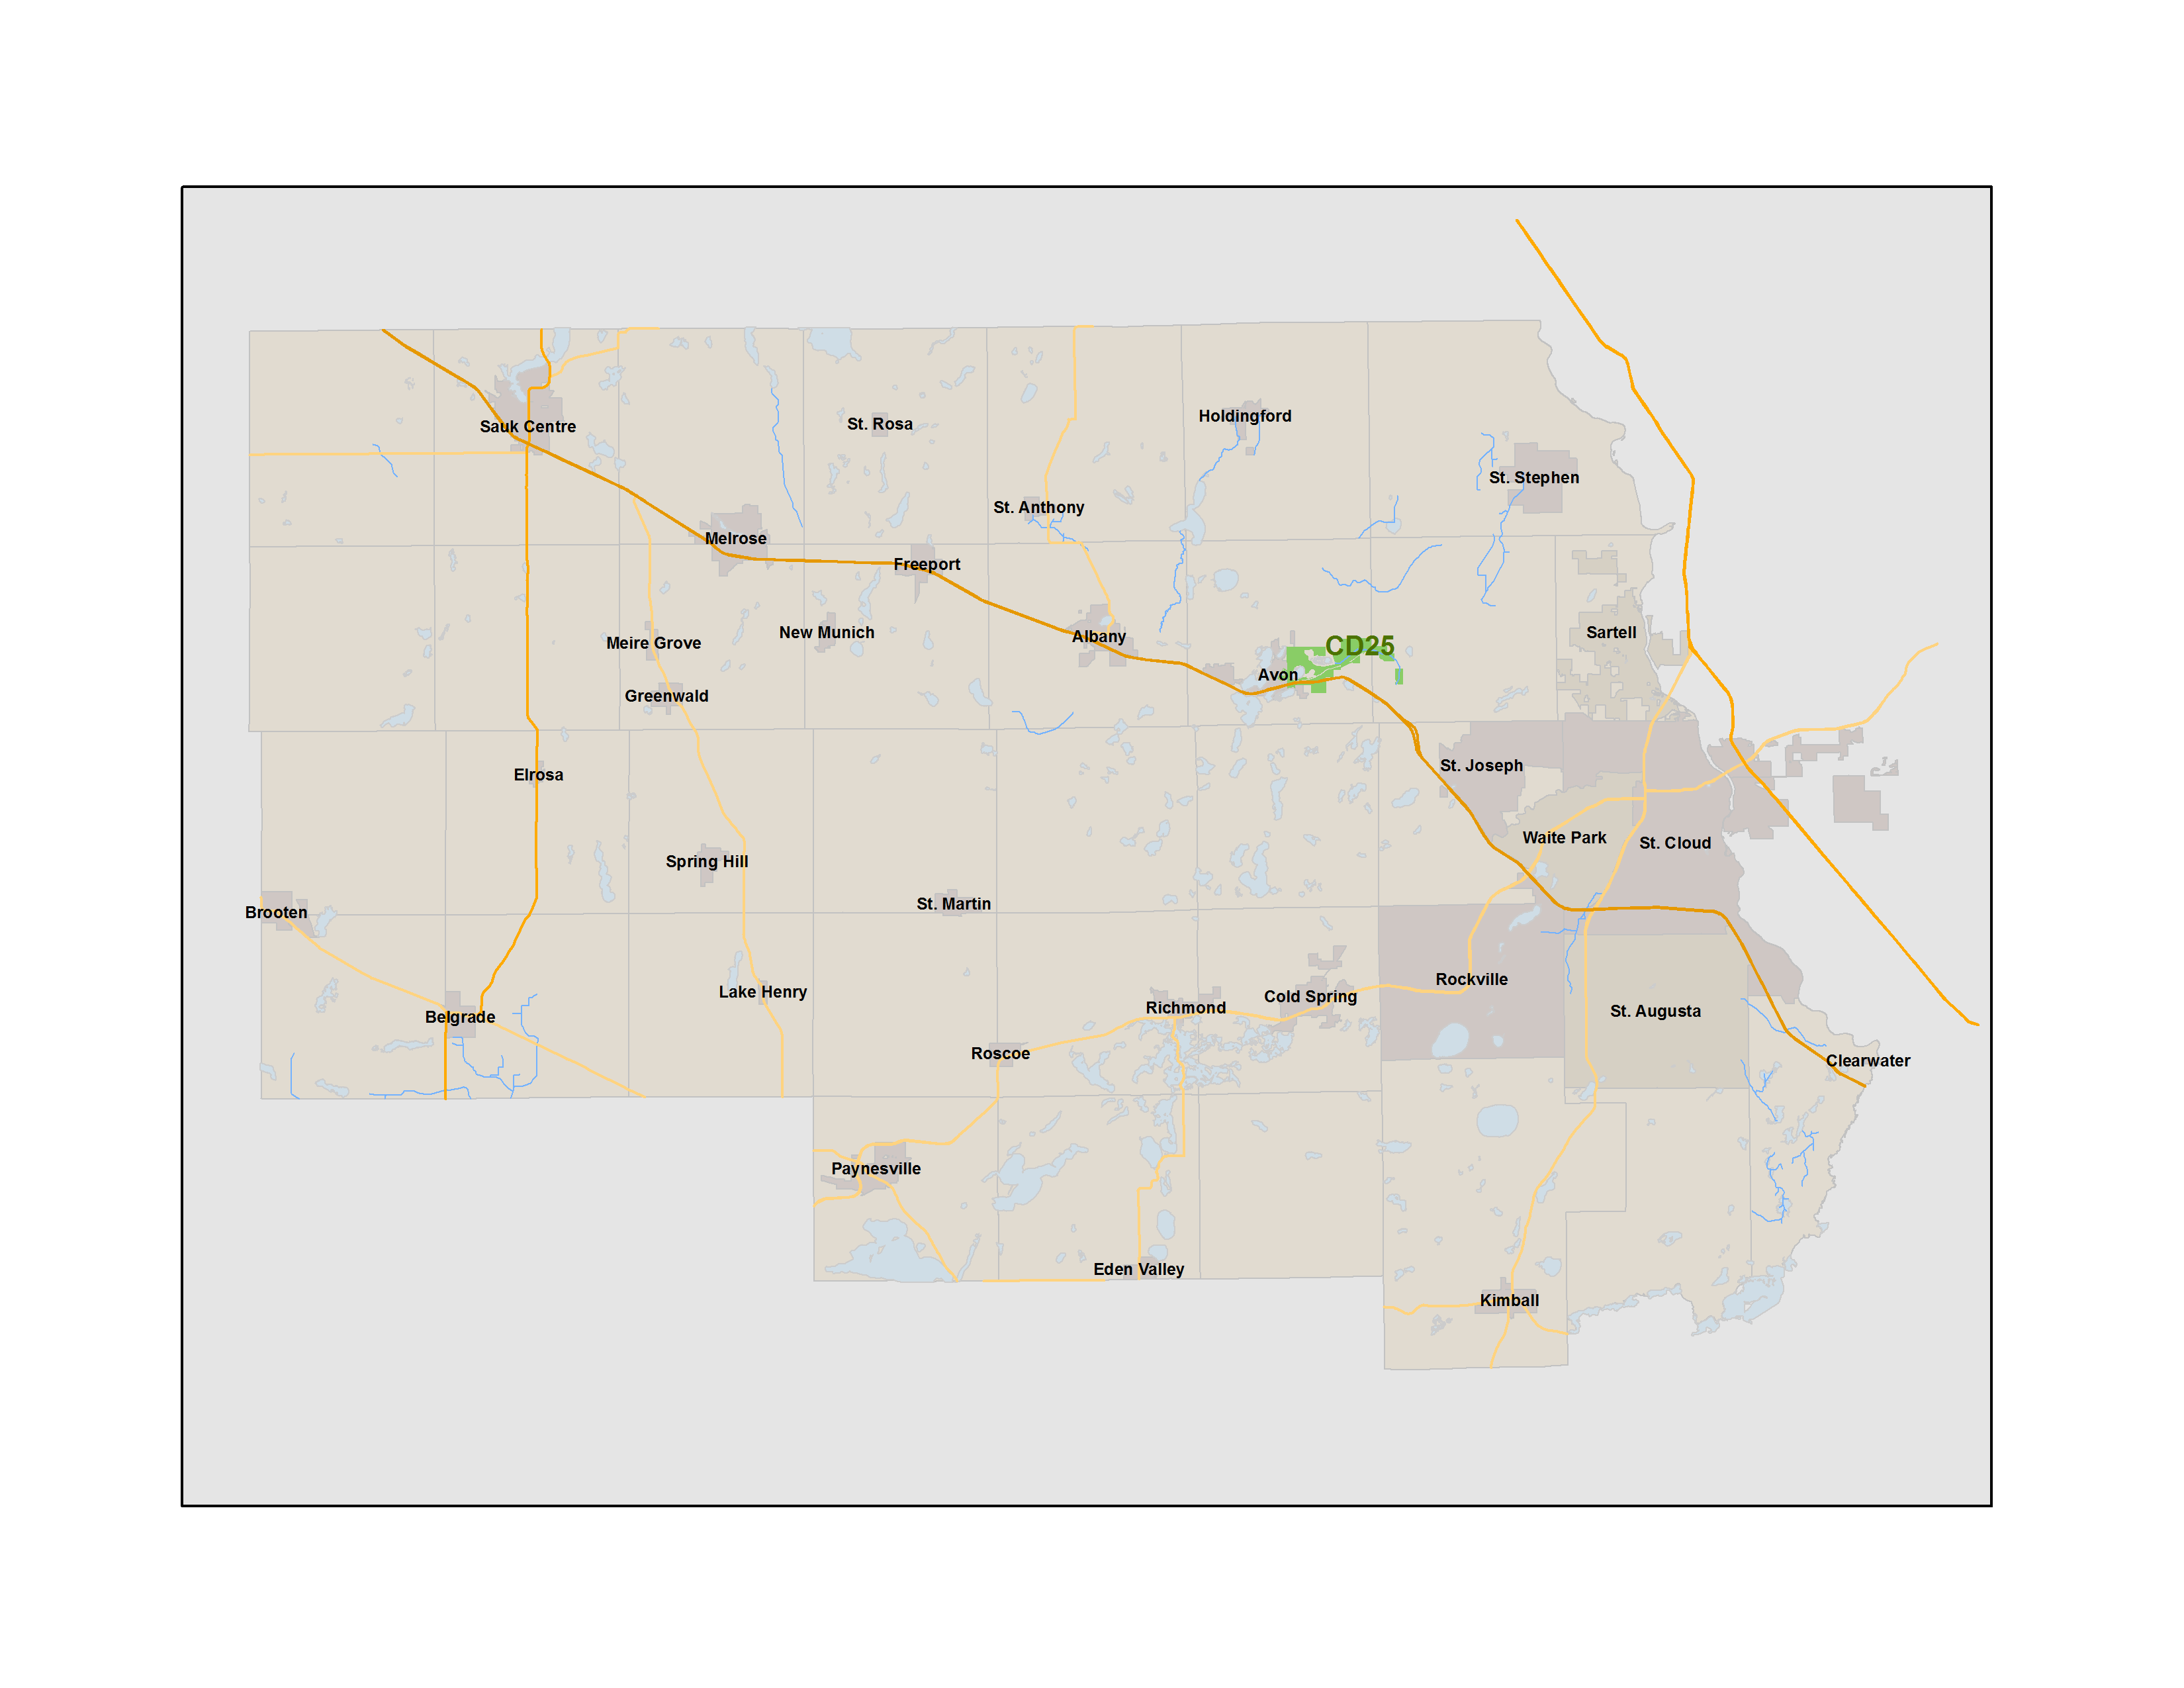 stearns county property map Stearns County Cd25 stearns county property map